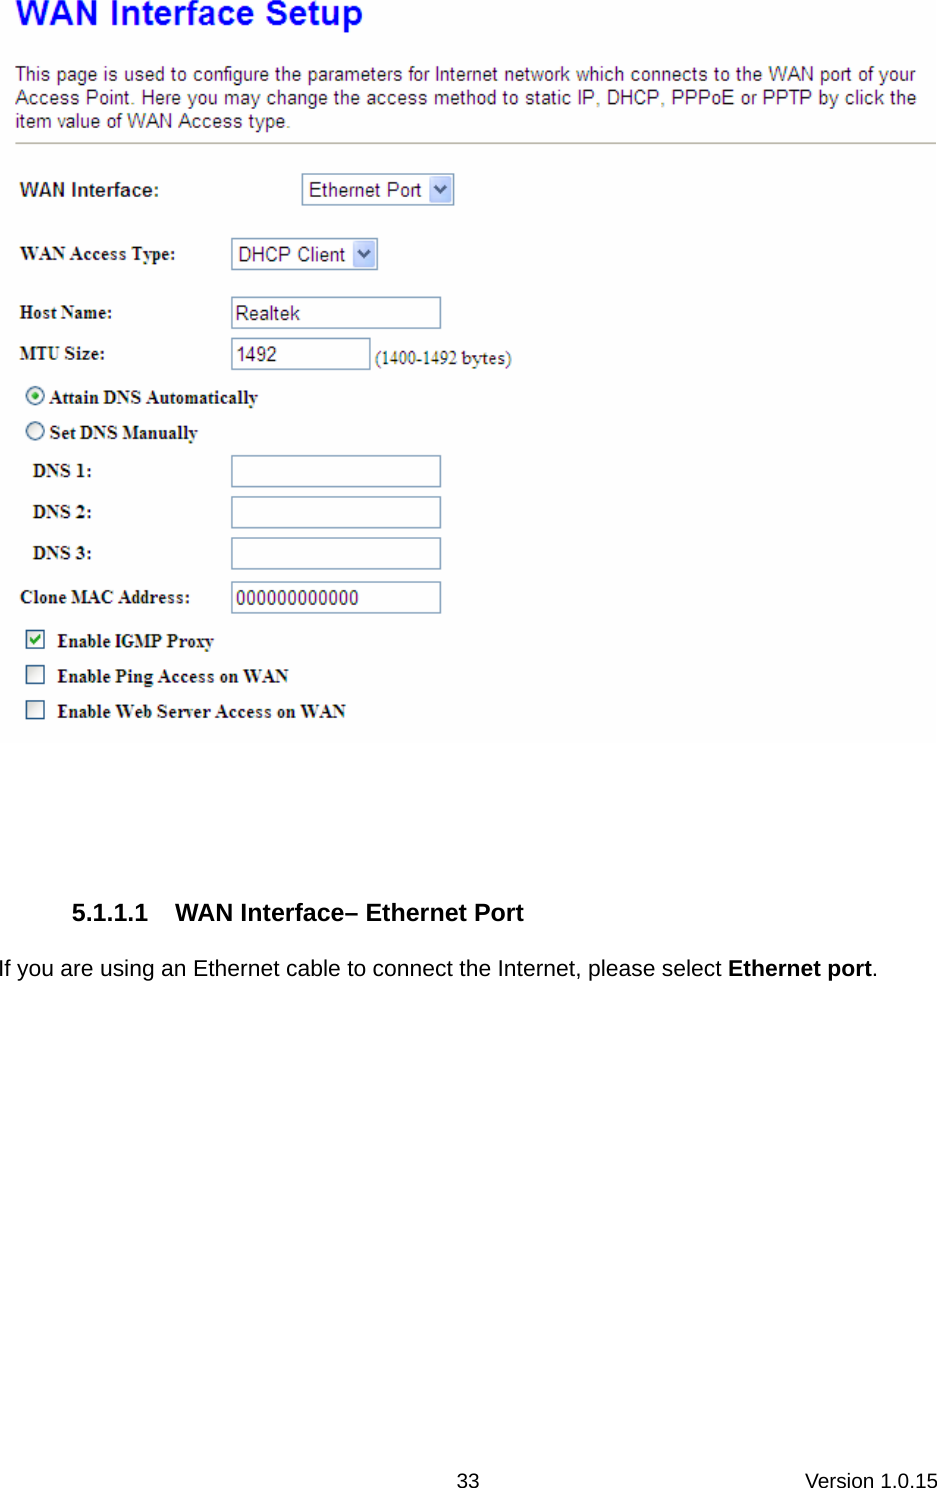 Version 1.0.15 33   5.1.1.1  WAN Interface– Ethernet Port If you are using an Ethernet cable to connect the Internet, please select Ethernet port.   